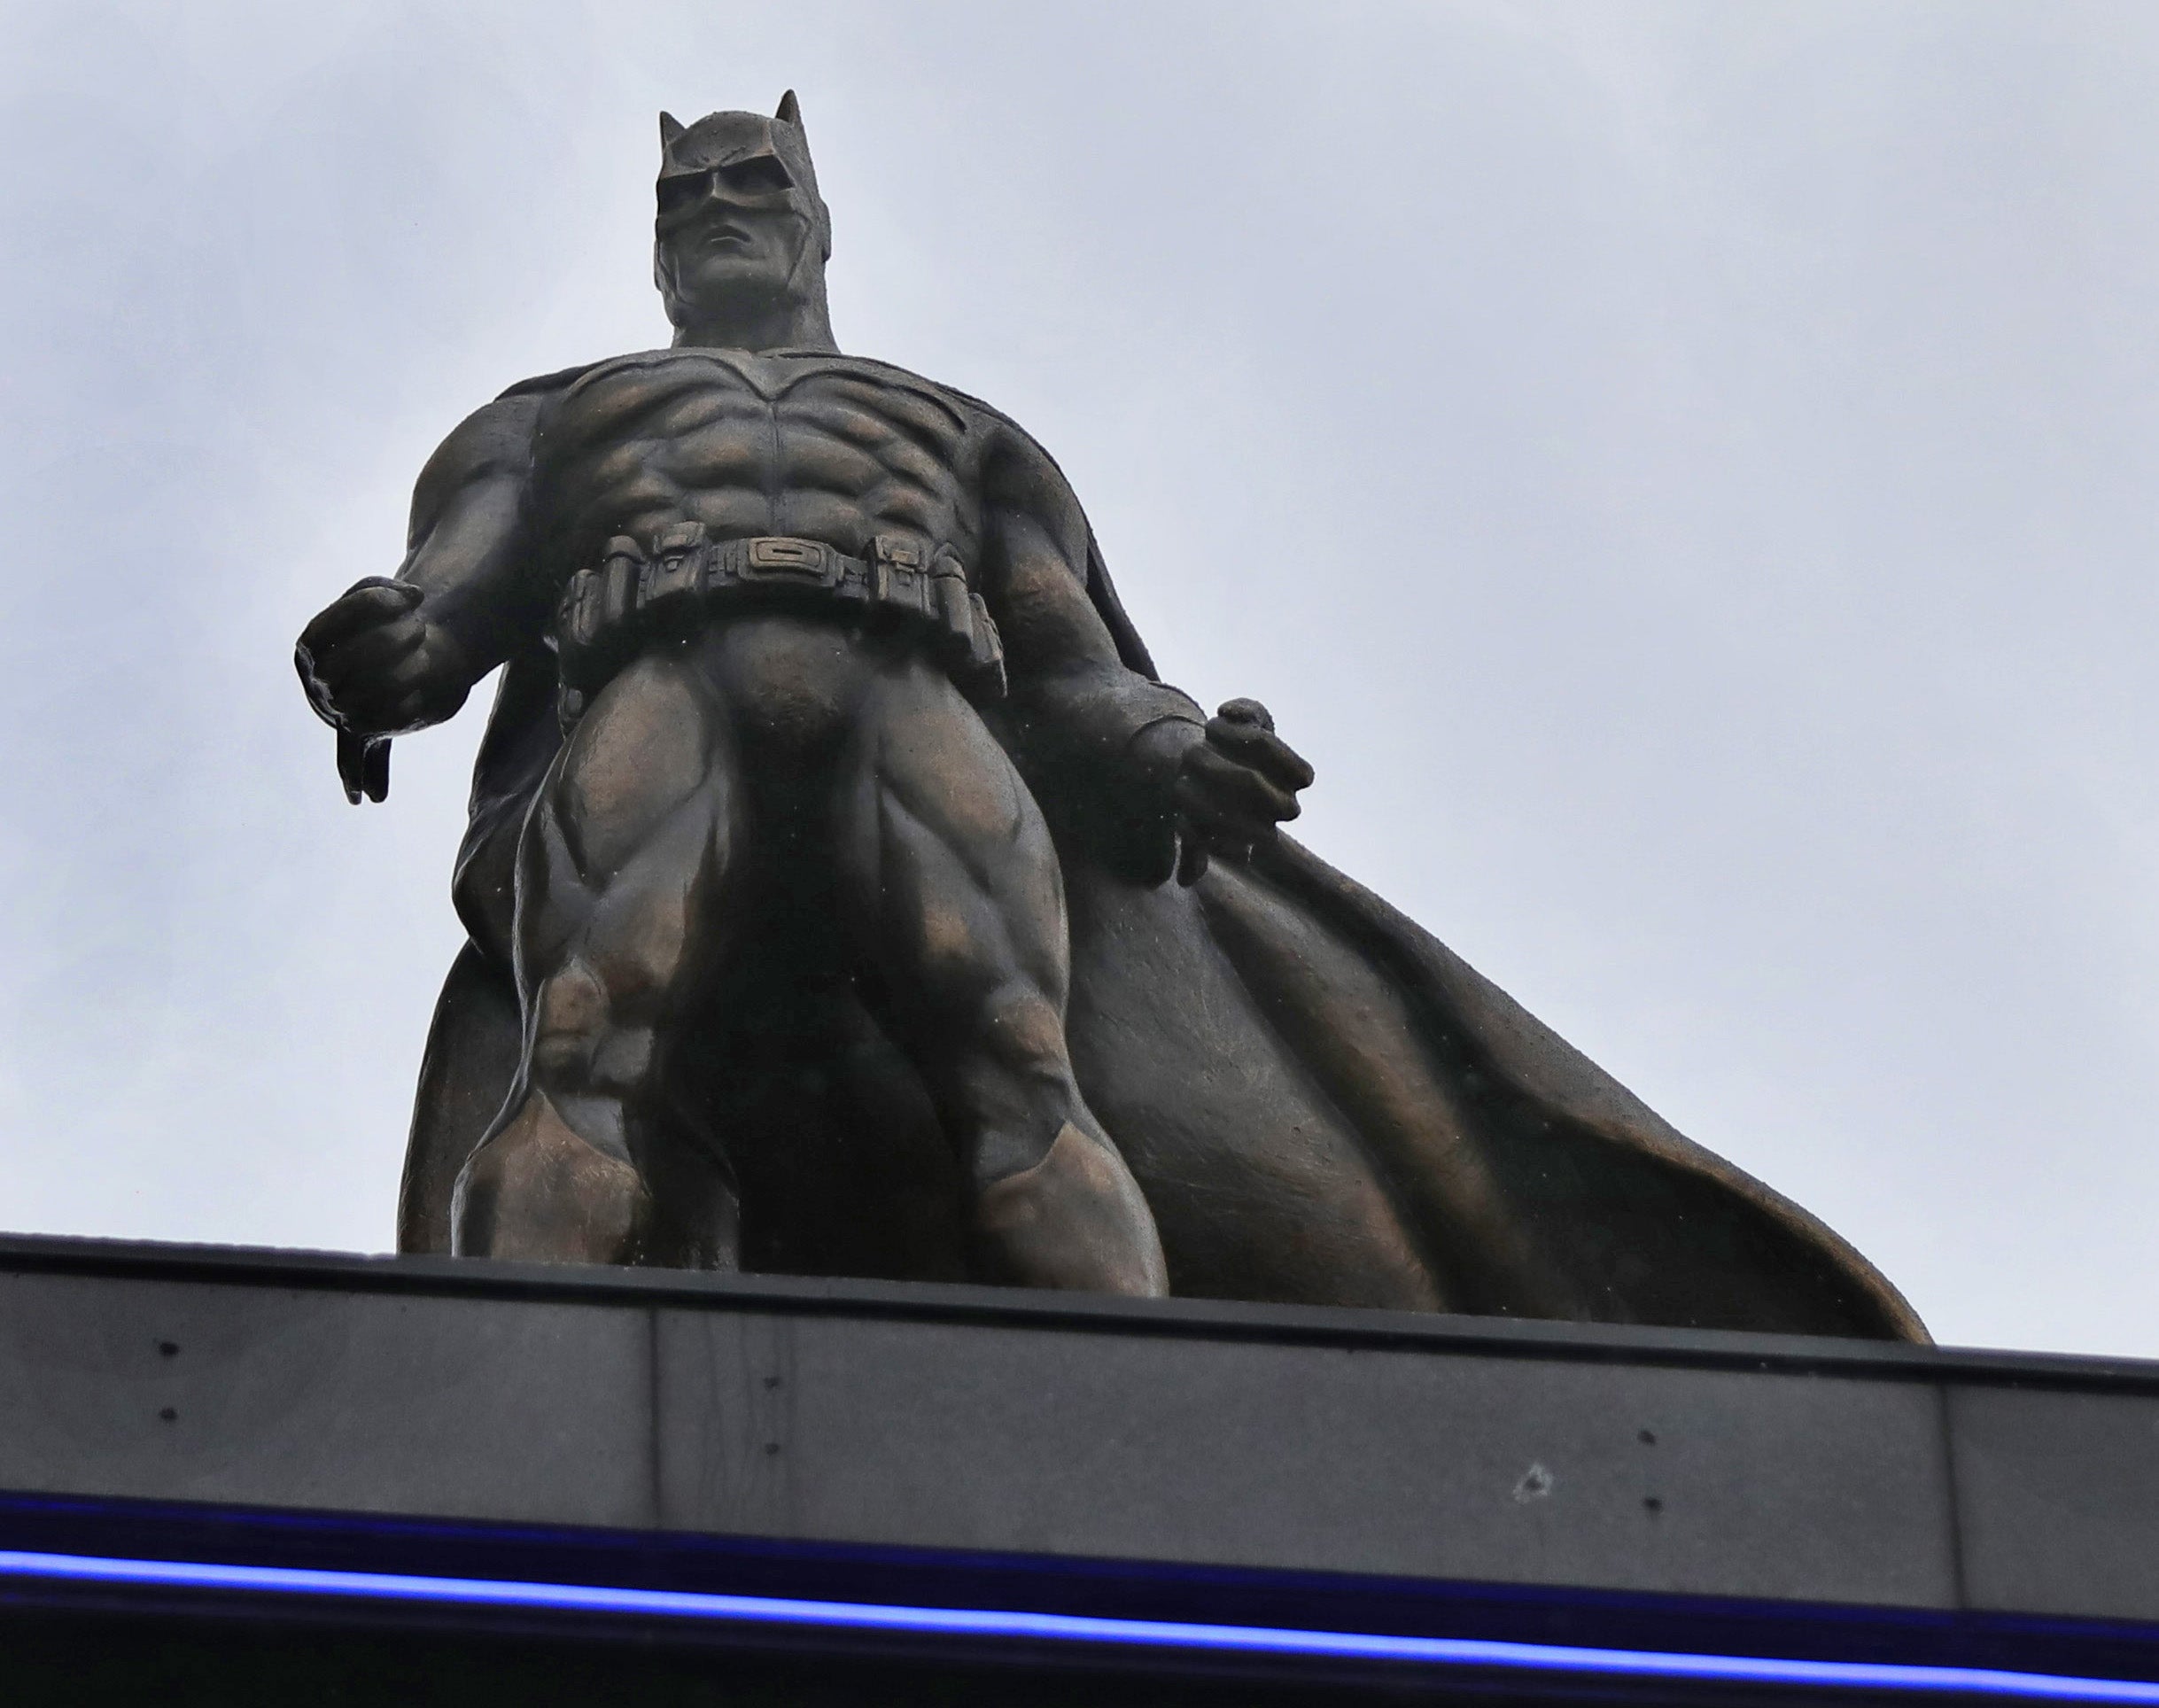 Cinema chain launches bid to overturn 15 rating for The Batman | The  Independent